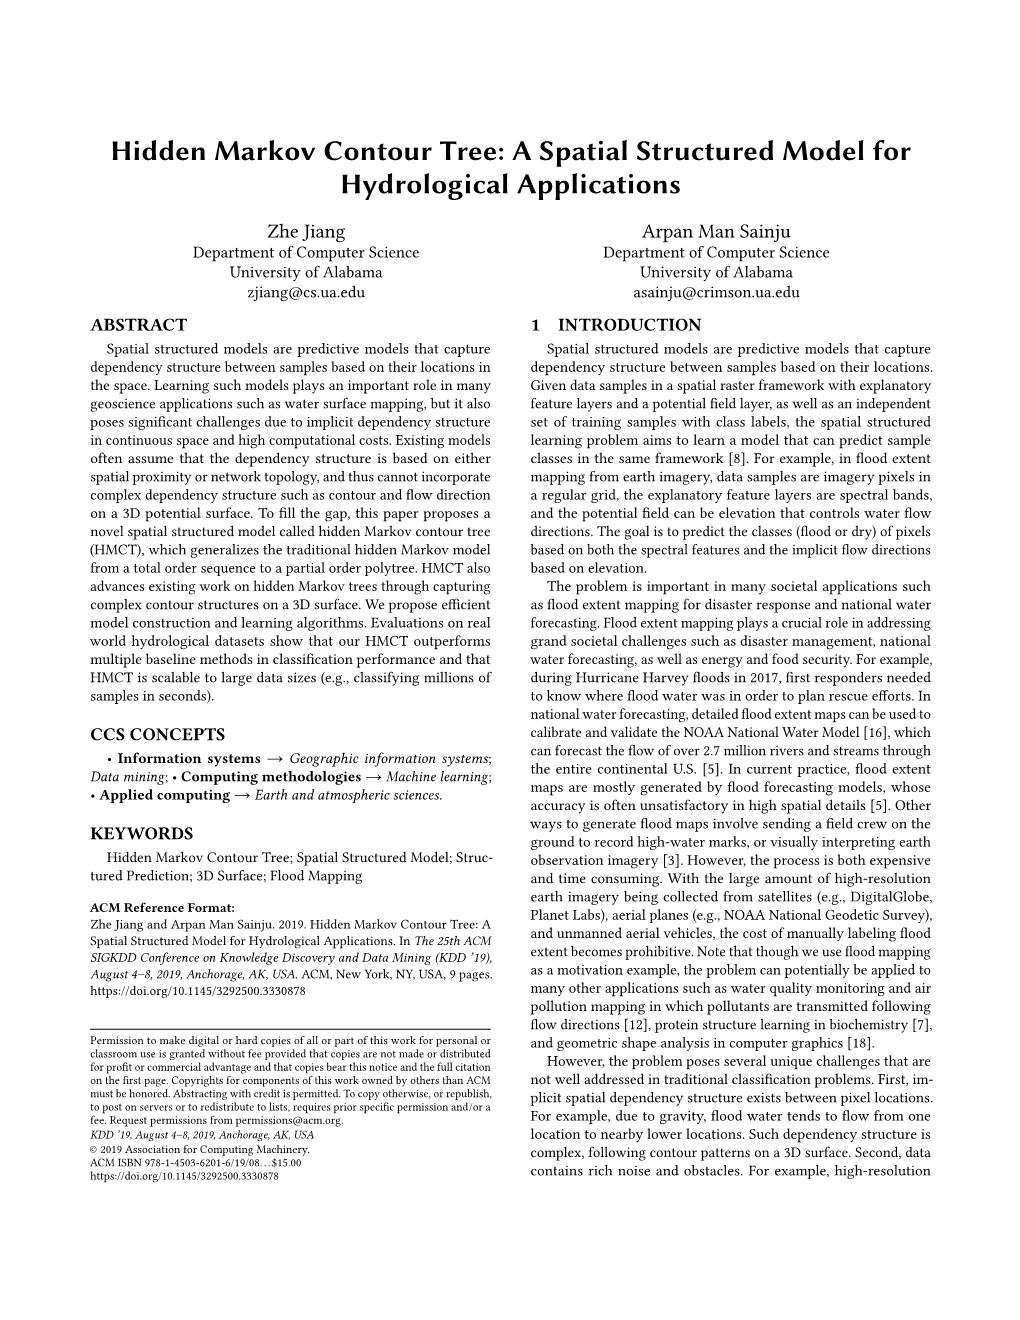 Hidden Markov Contour Tree: a Spatial Structured Model for Hydrological Applications